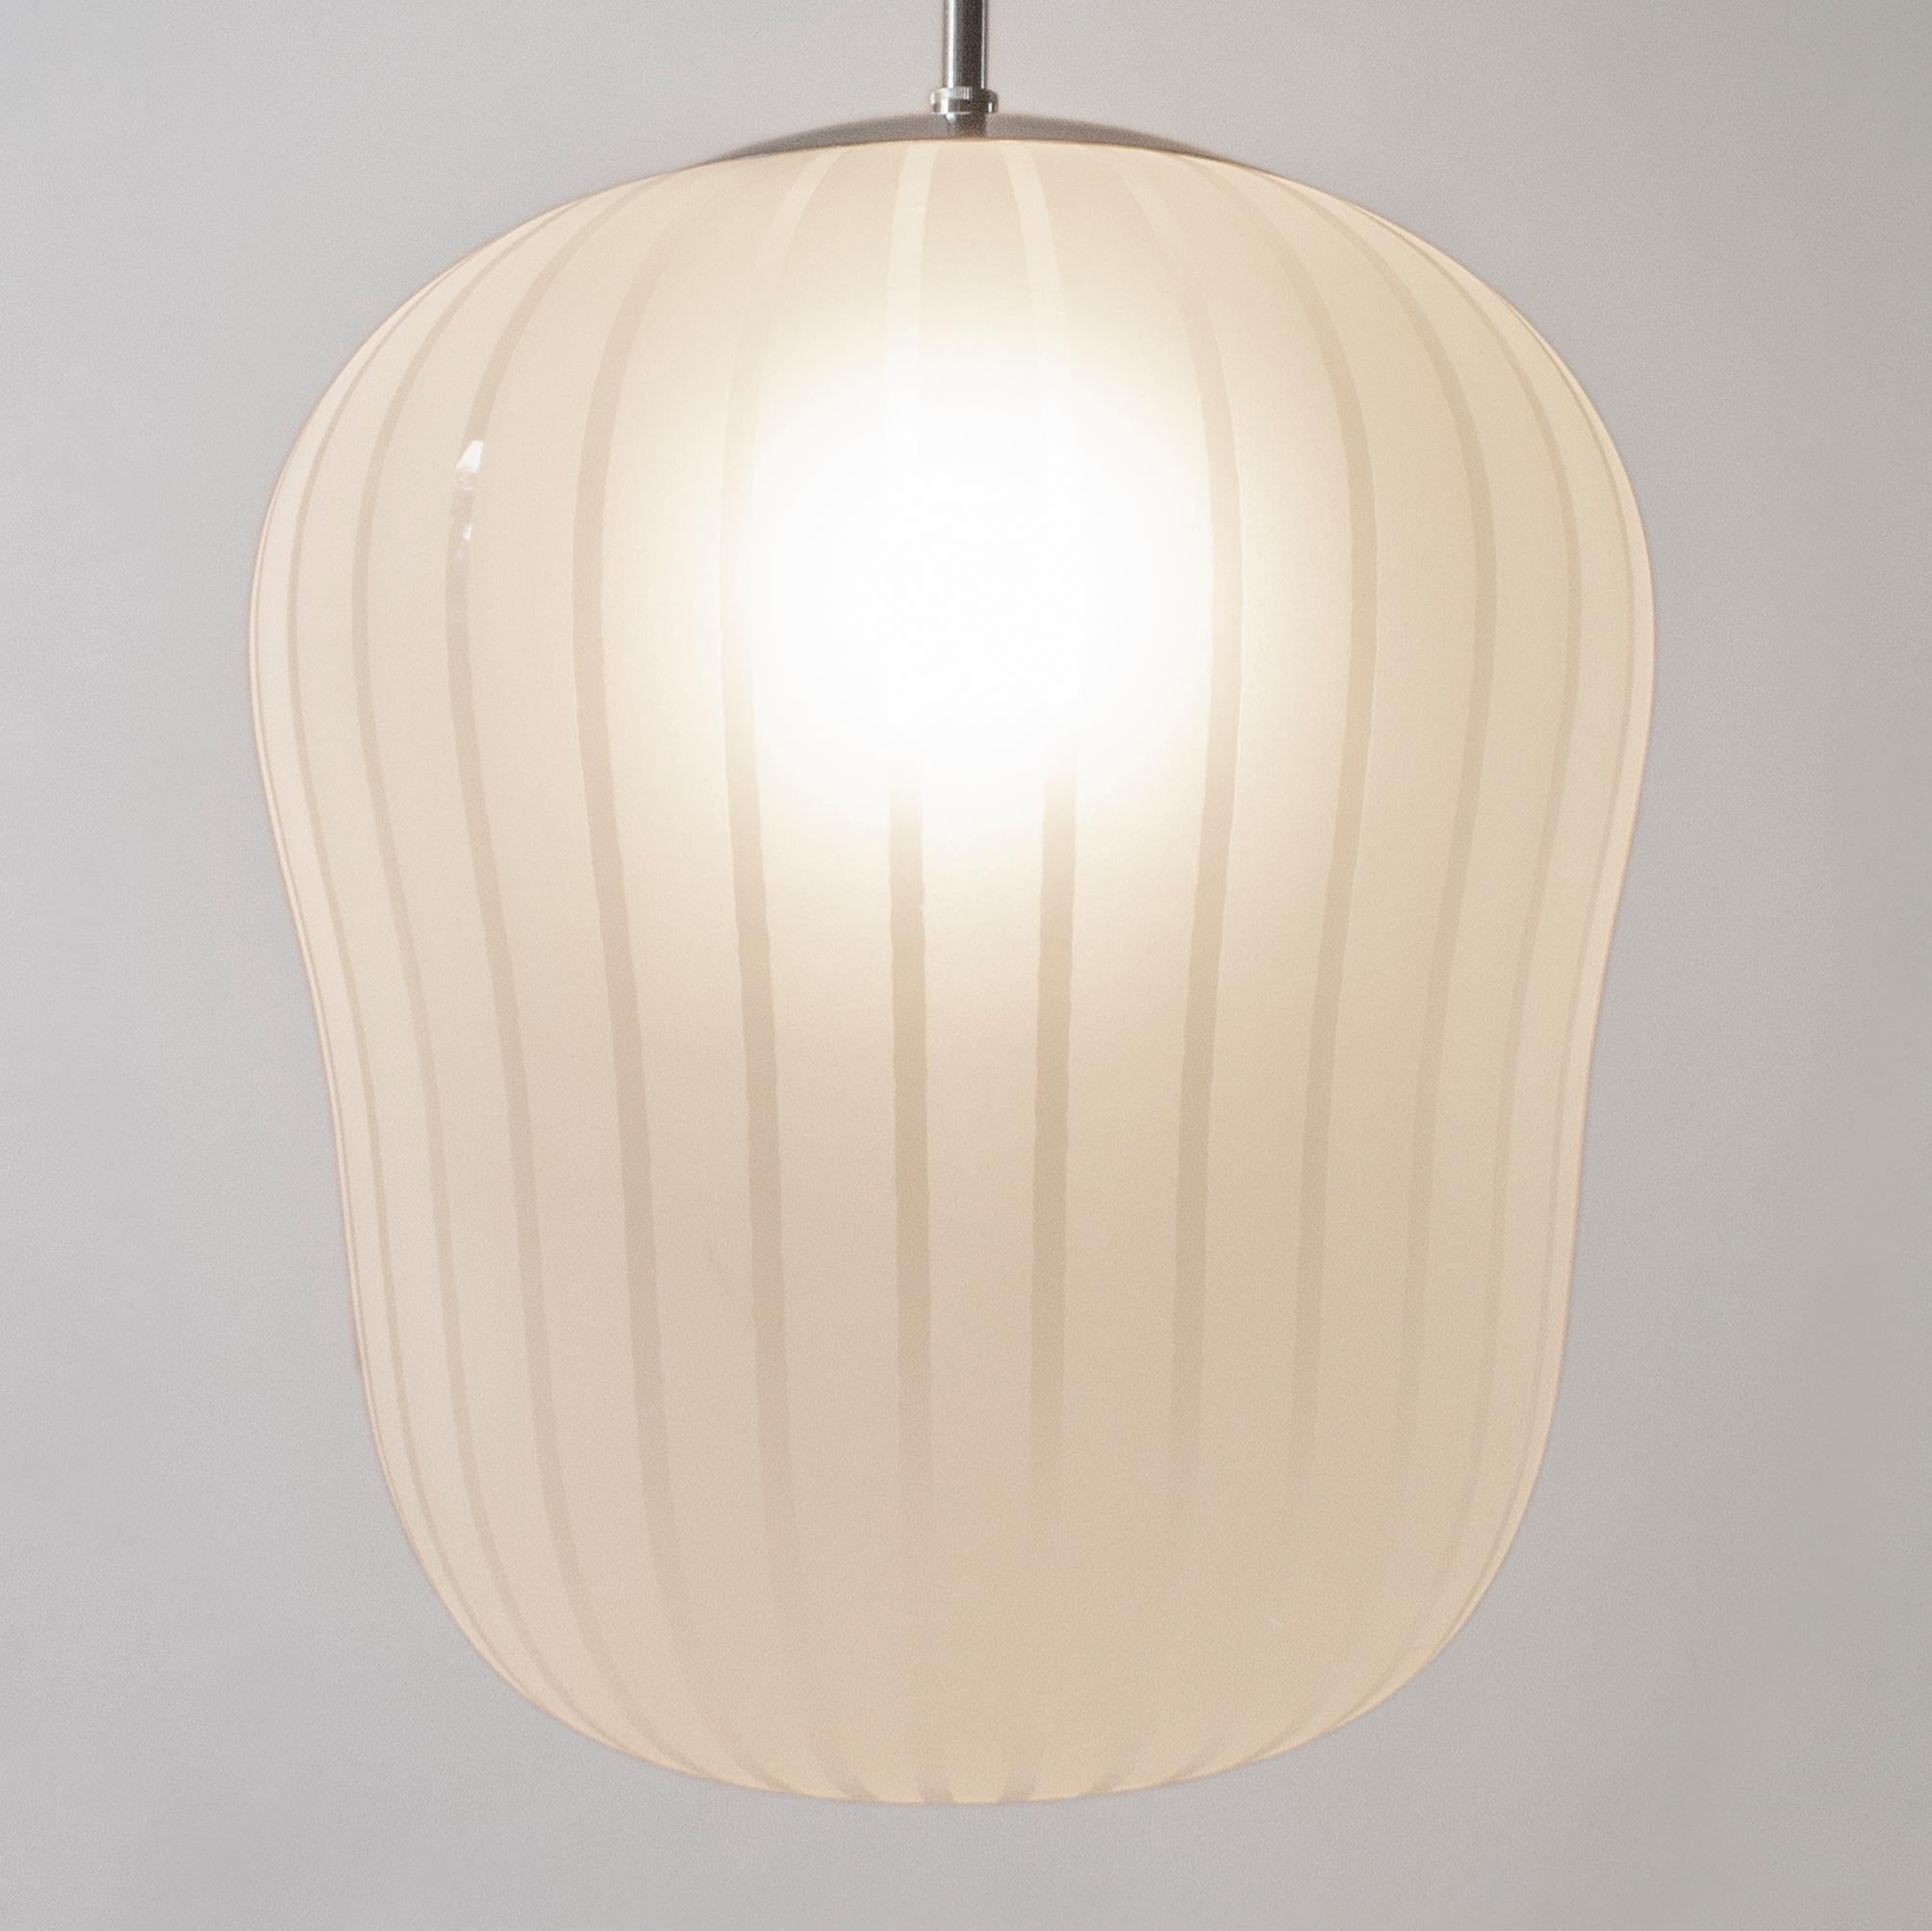 Professionally restored, rewired and ready to add to your collection. The domed nickel-plated canopy, above hanging rod suspending a large colorless glass diffuser, the interior etched to conceal the single light bulb, the exterior adorned in